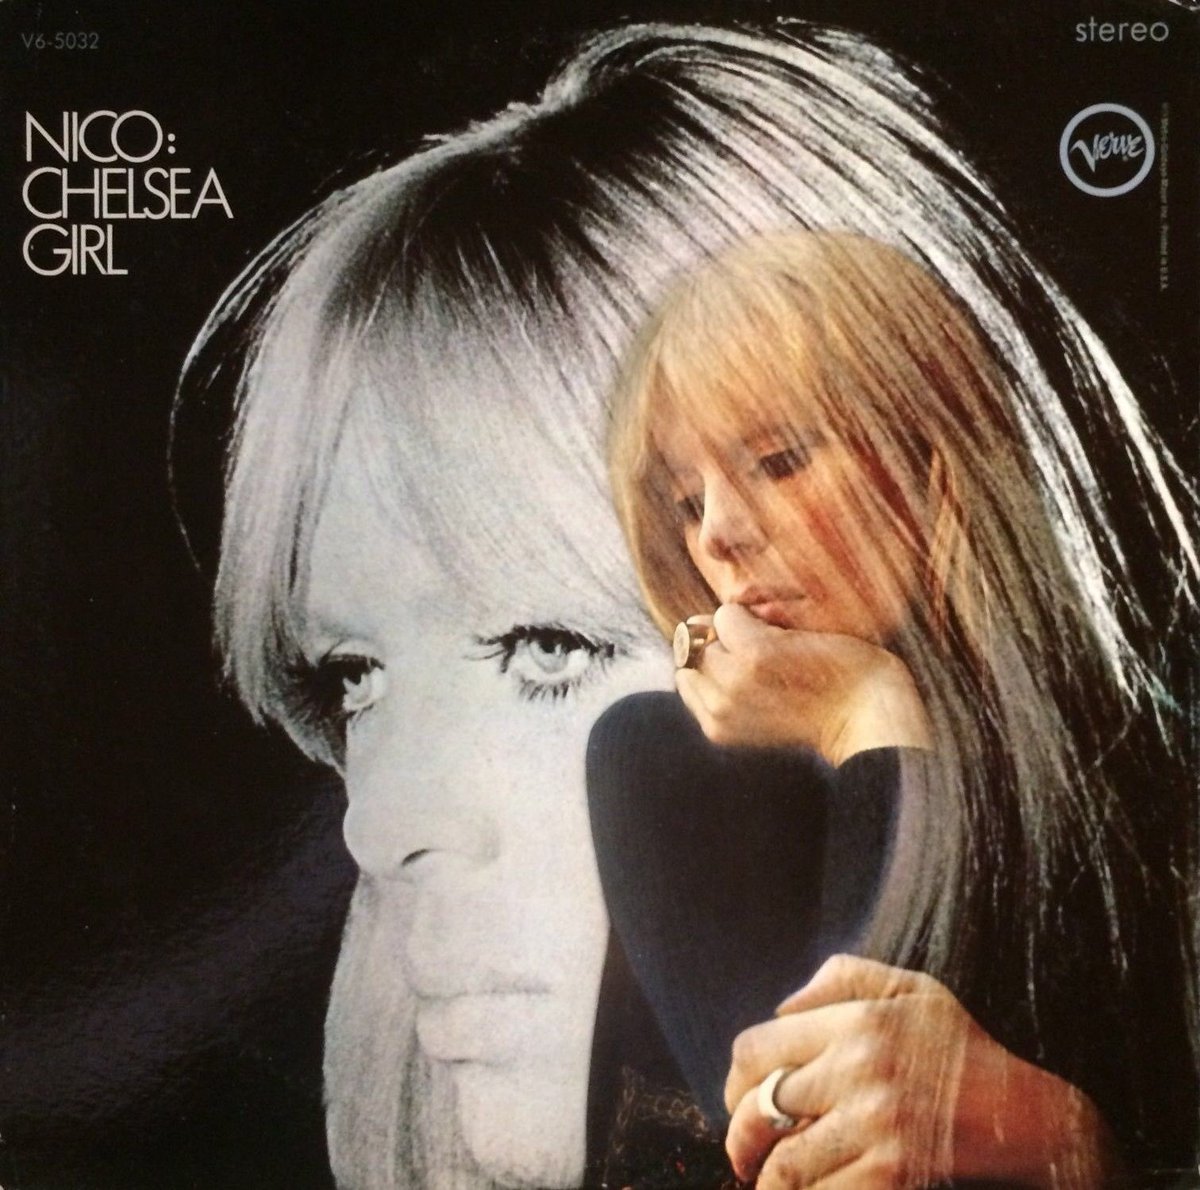 77. Nico - Chelsea Girl (1967) Genre: Chamber FolkRating: ★★★★½ 2016Note: As beautiful as it is haunting. Nico would disagree, but the flutes compliment her vocals so well.